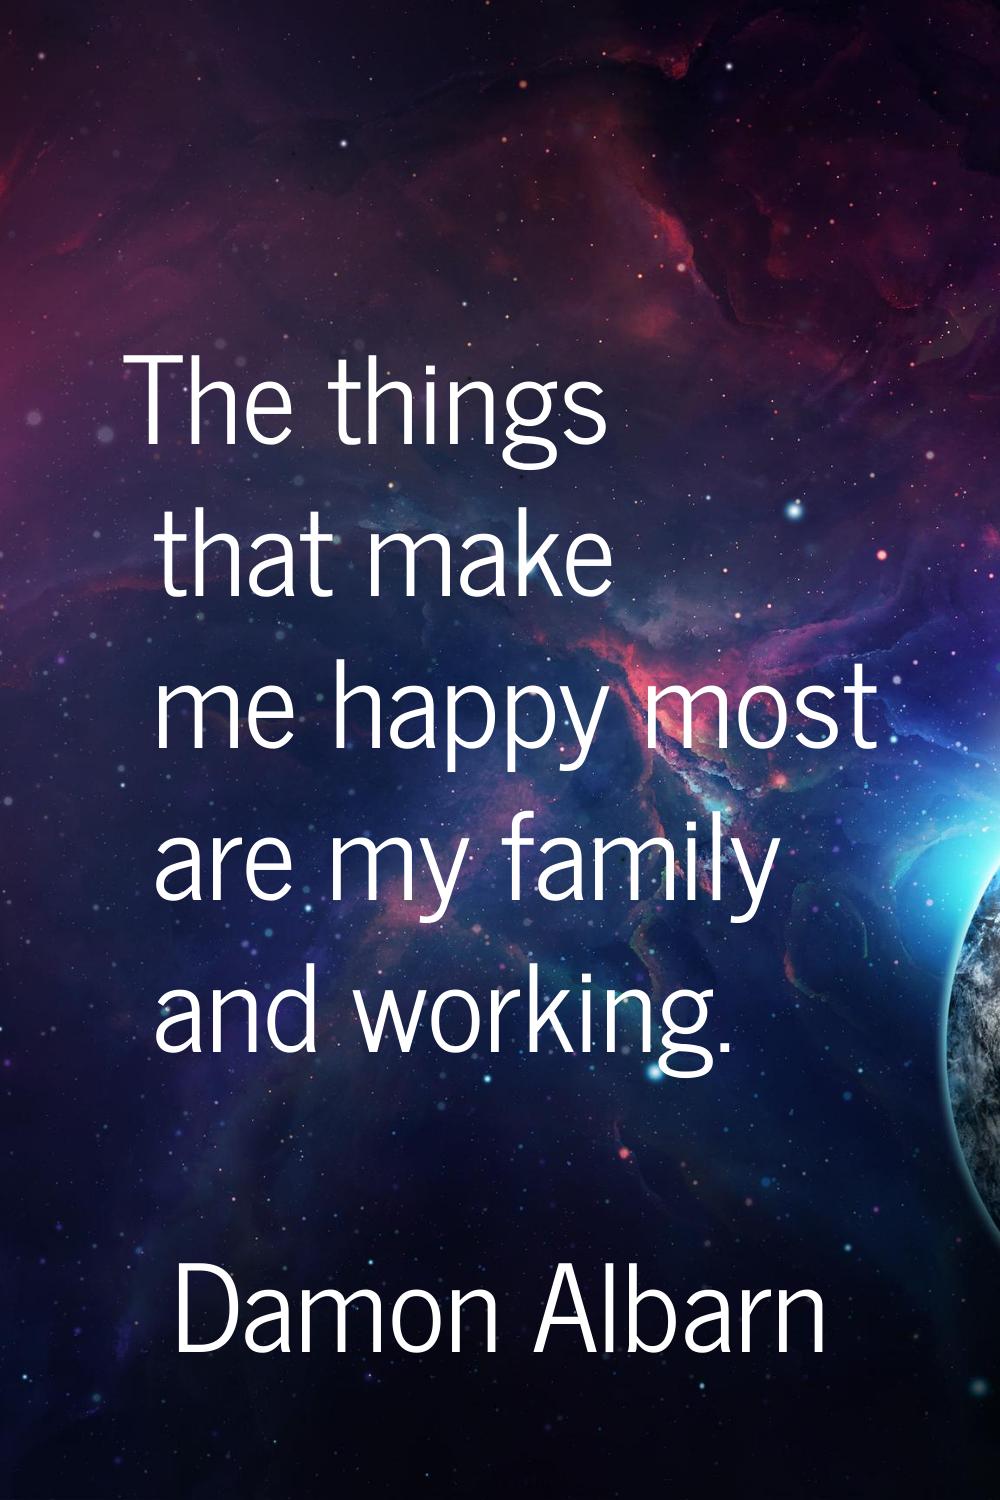 The things that make me happy most are my family and working.